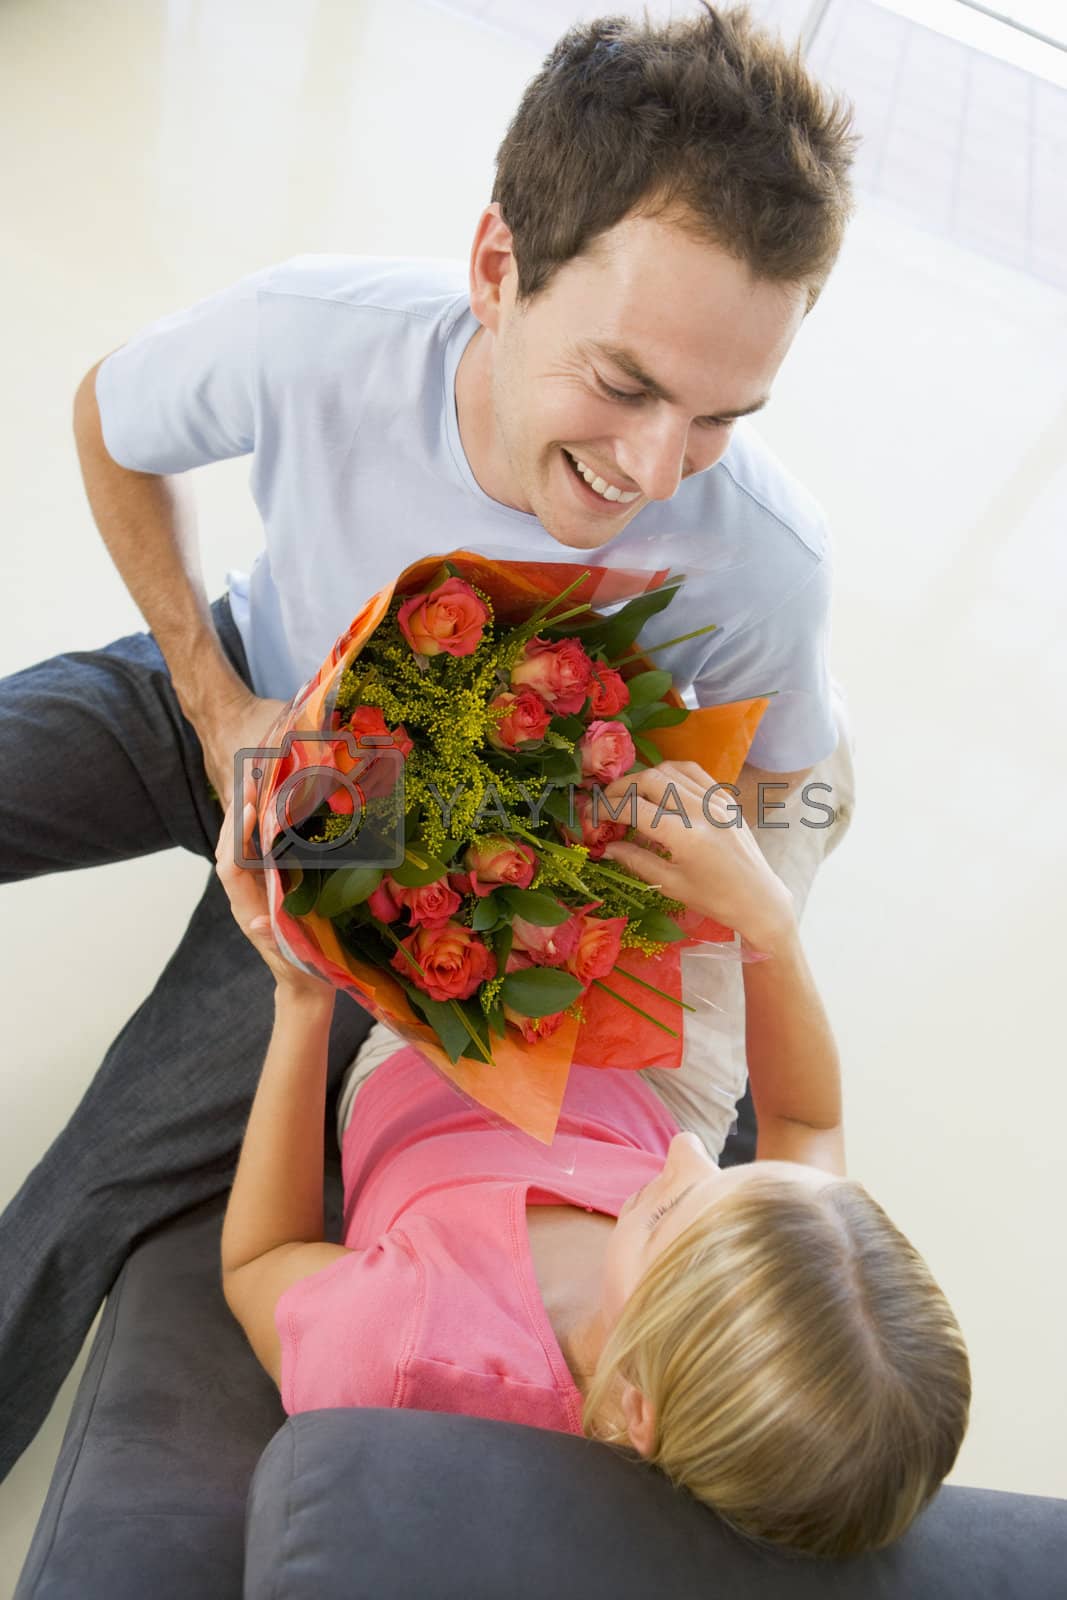 Royalty free image of Husband giving wife flowers and smiling by MonkeyBusiness